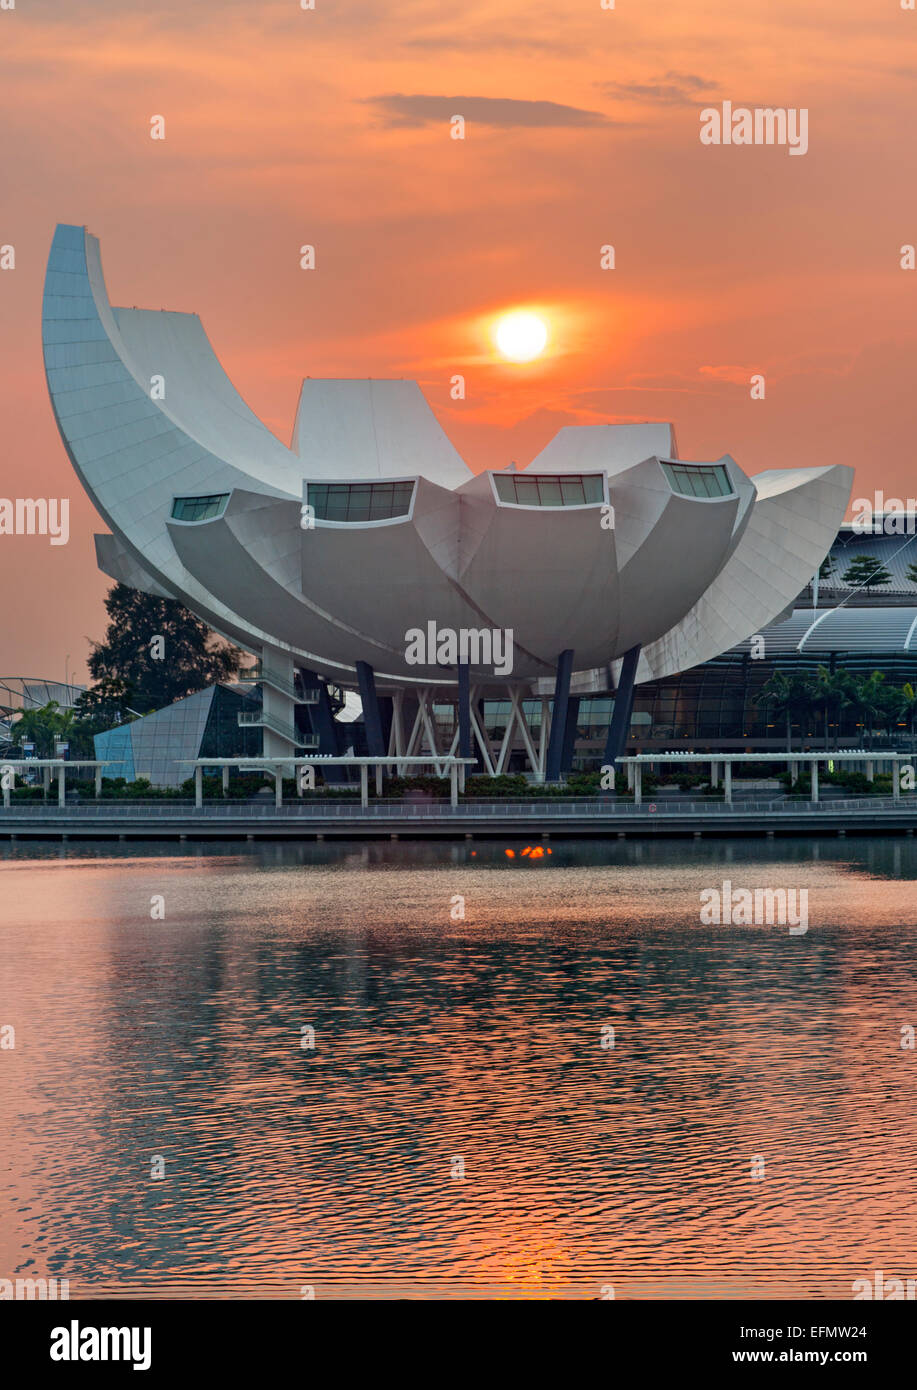 The Art Science Museum in Singapore at dawn. Stock Photo